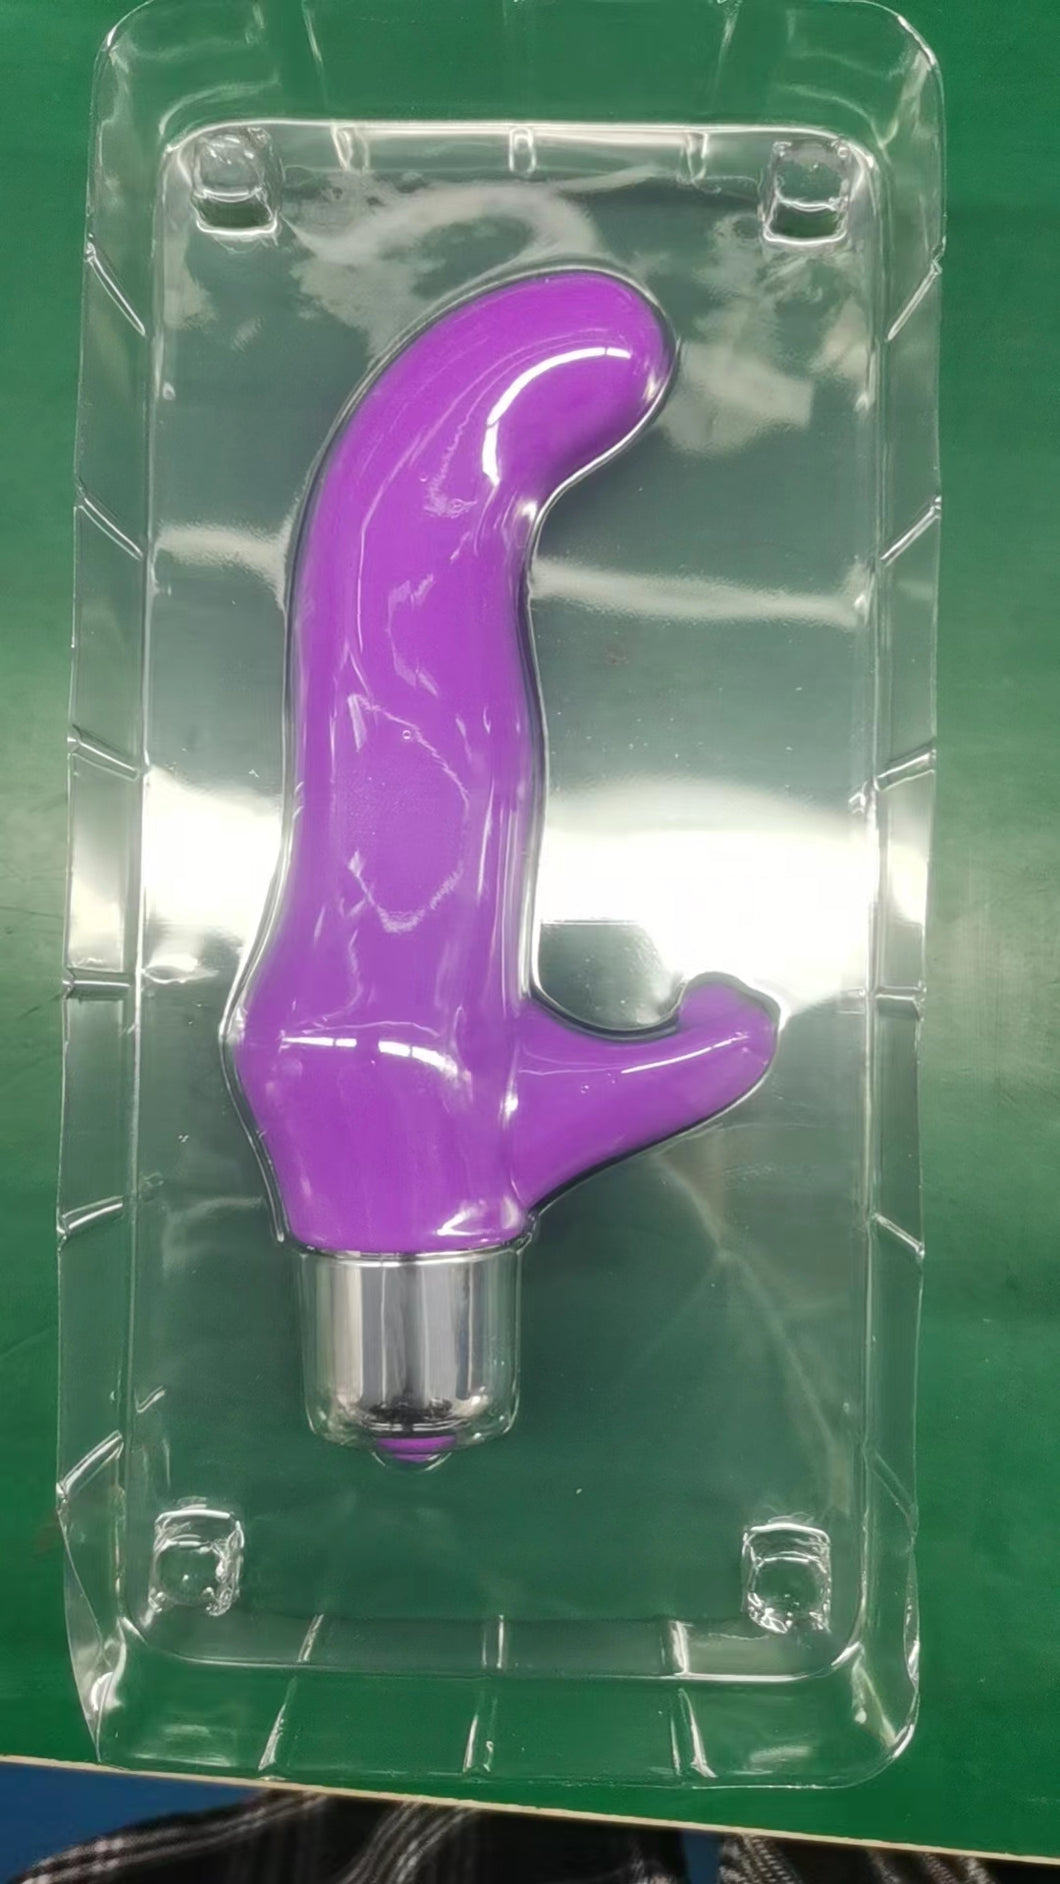 Adult sex toy silicone vibrator for woman